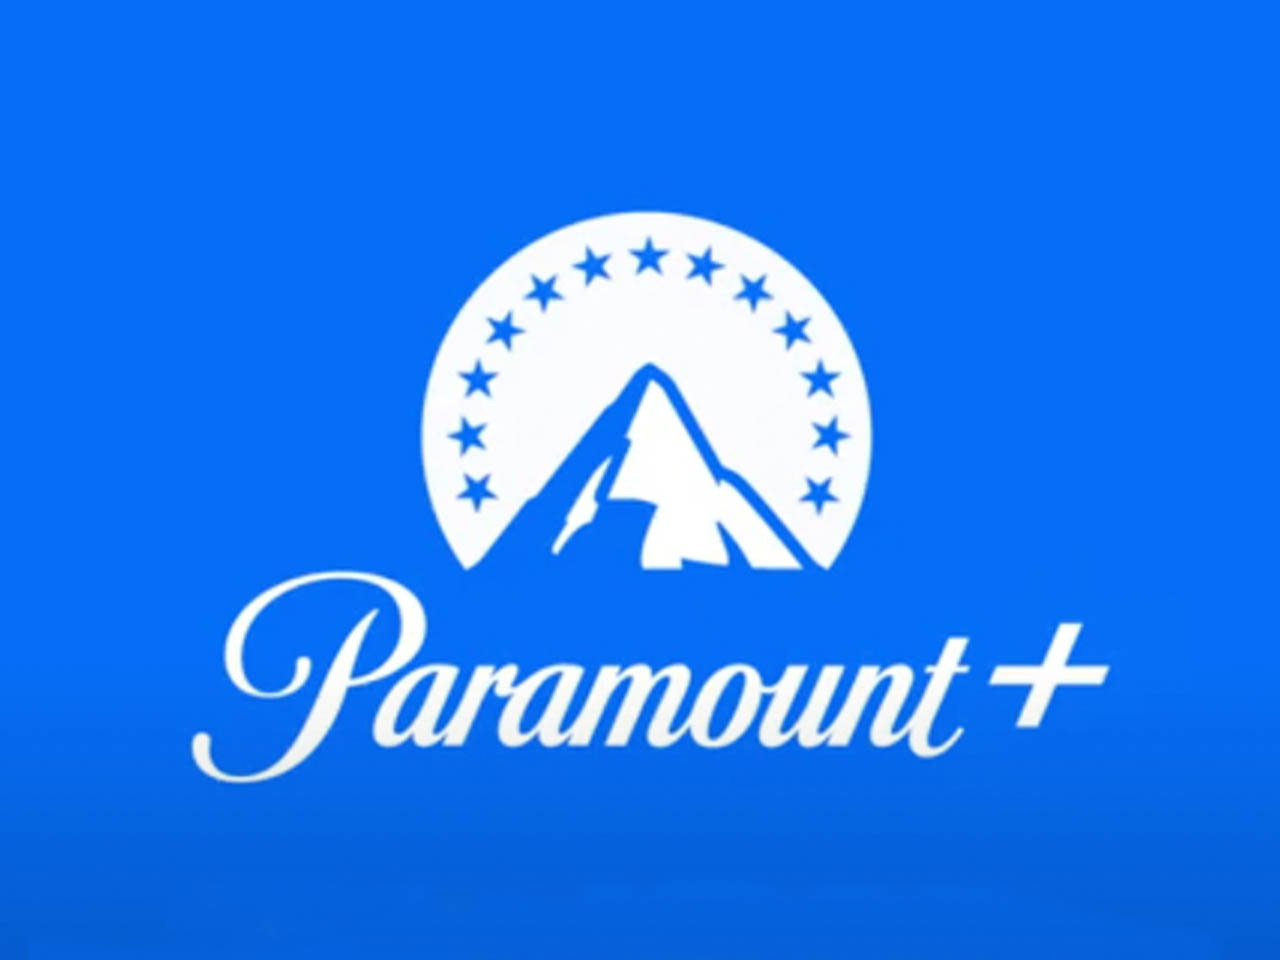 CBS All Access to relaunch as Paramount Plus | The Nerdy